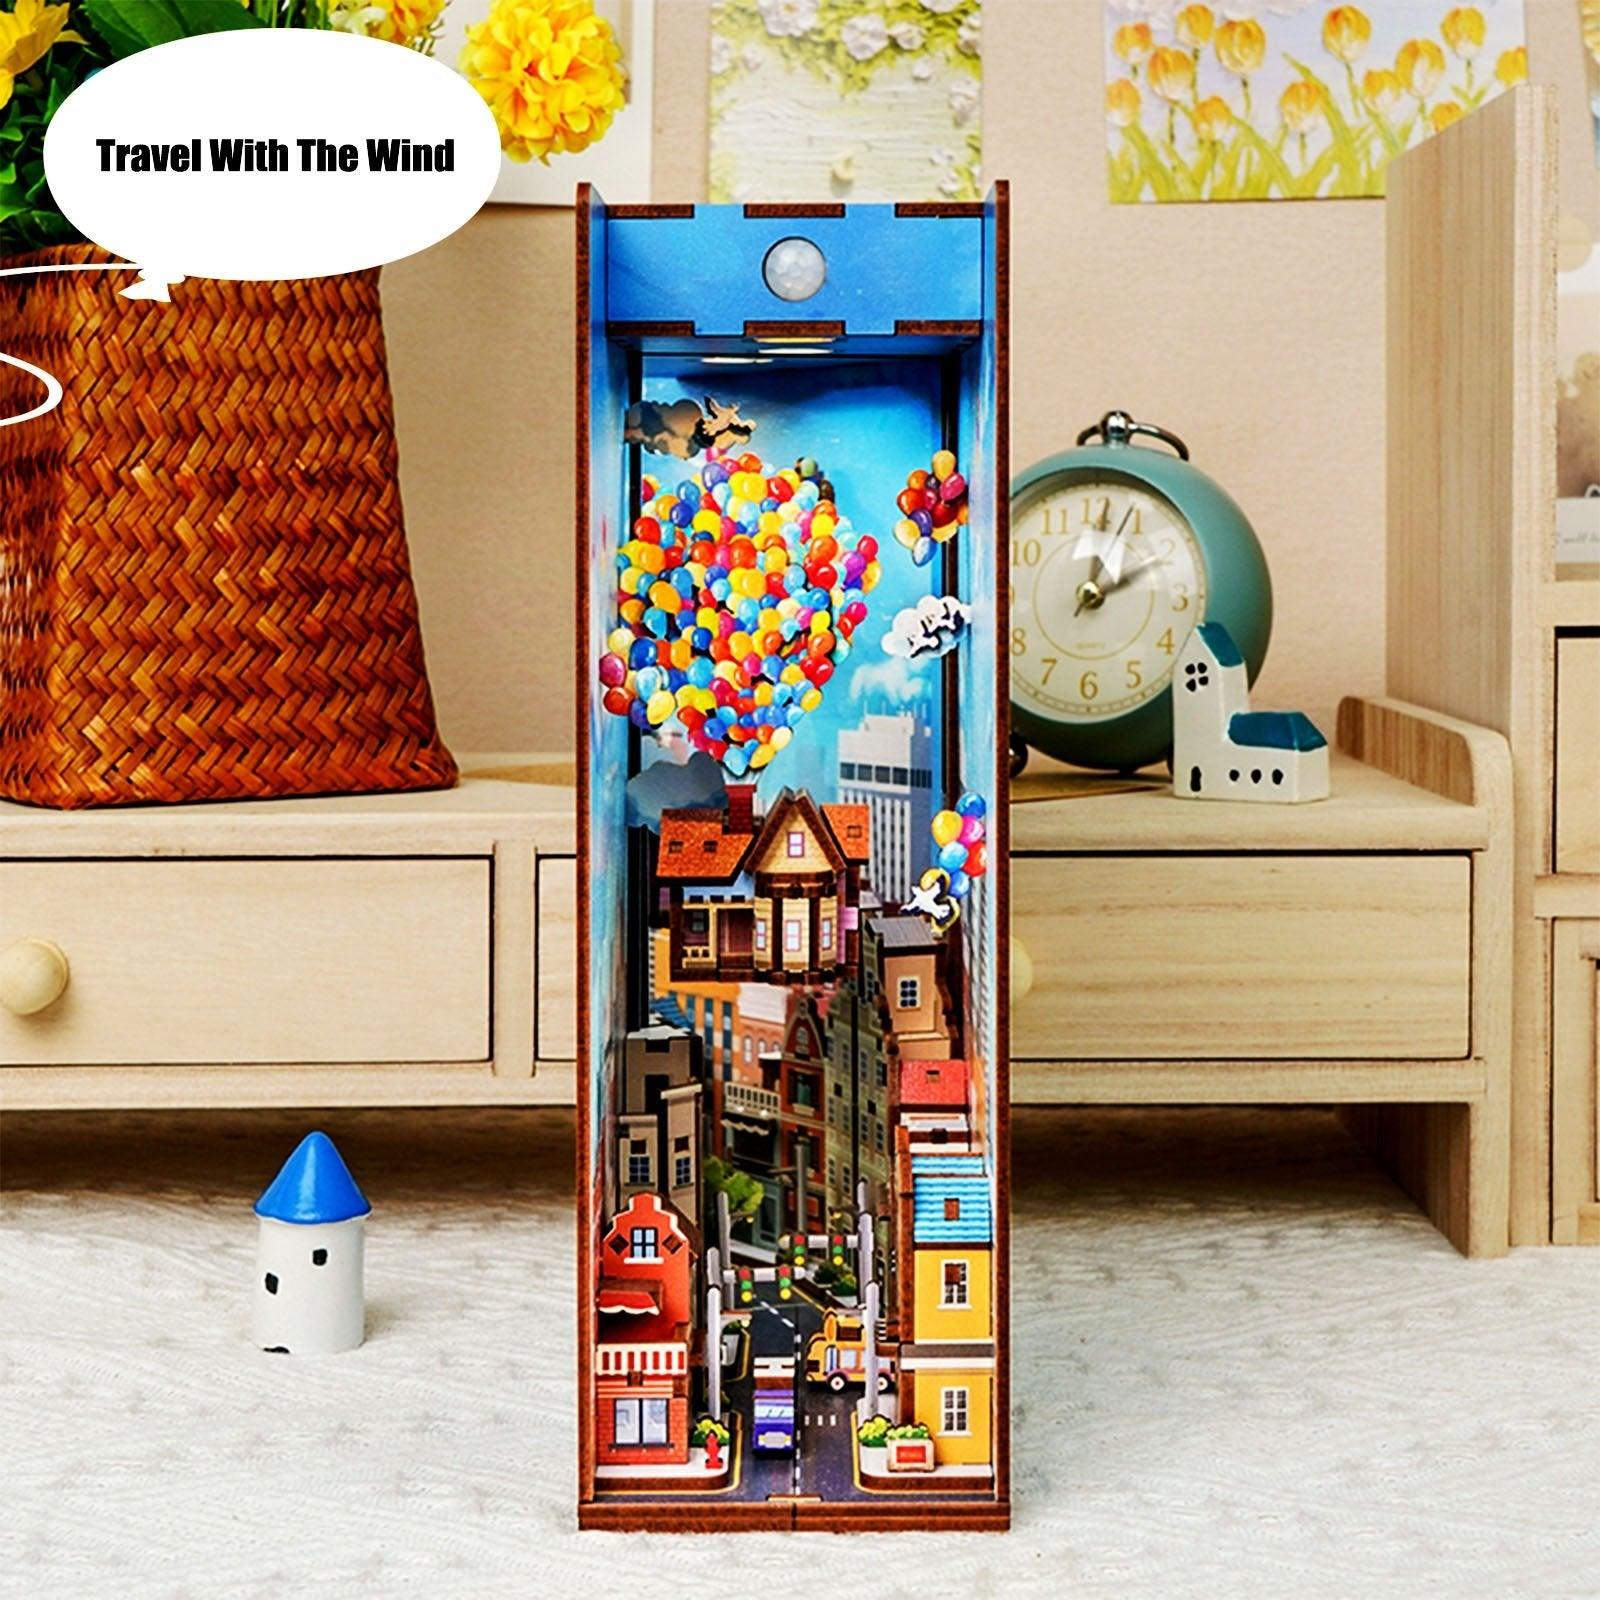 Up! Travel with The Wind DIY Book Nook Kit